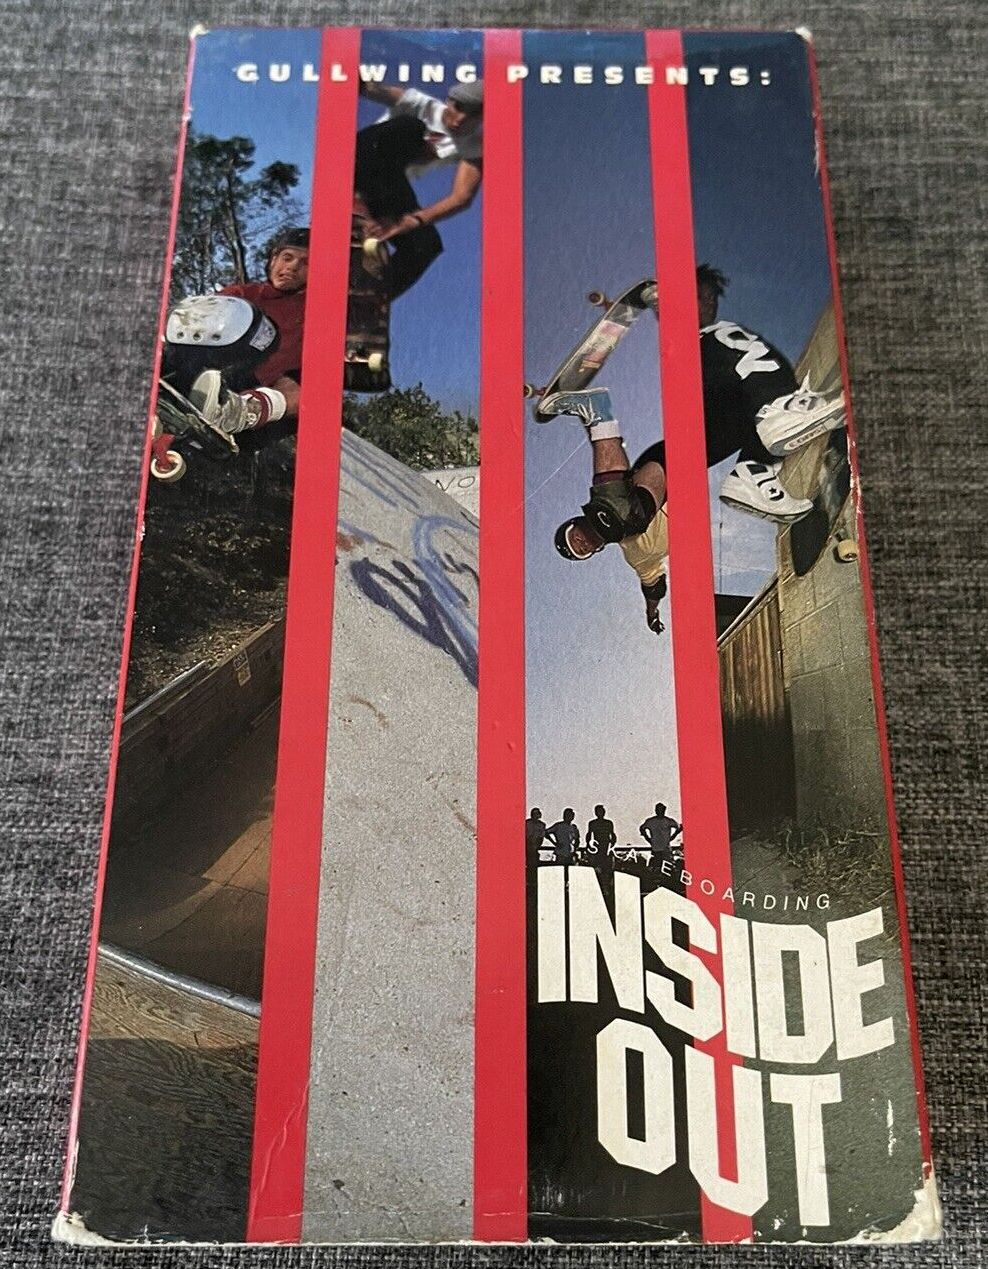 Gullwing - Skateboarding Inside Out cover